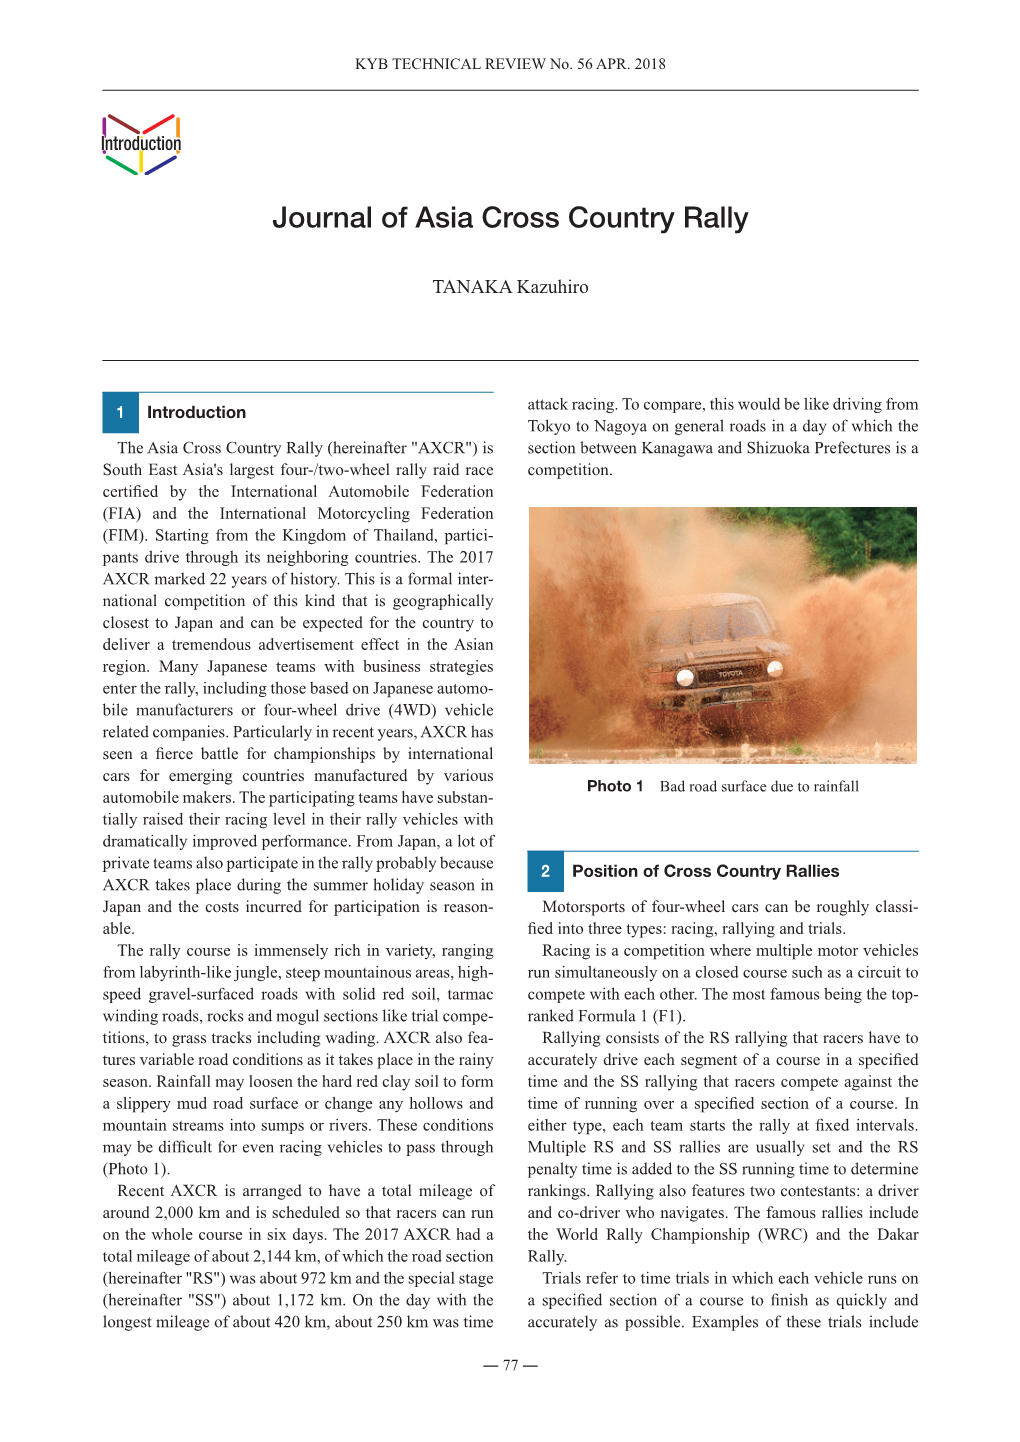 Journal of Asia Cross Country Rally